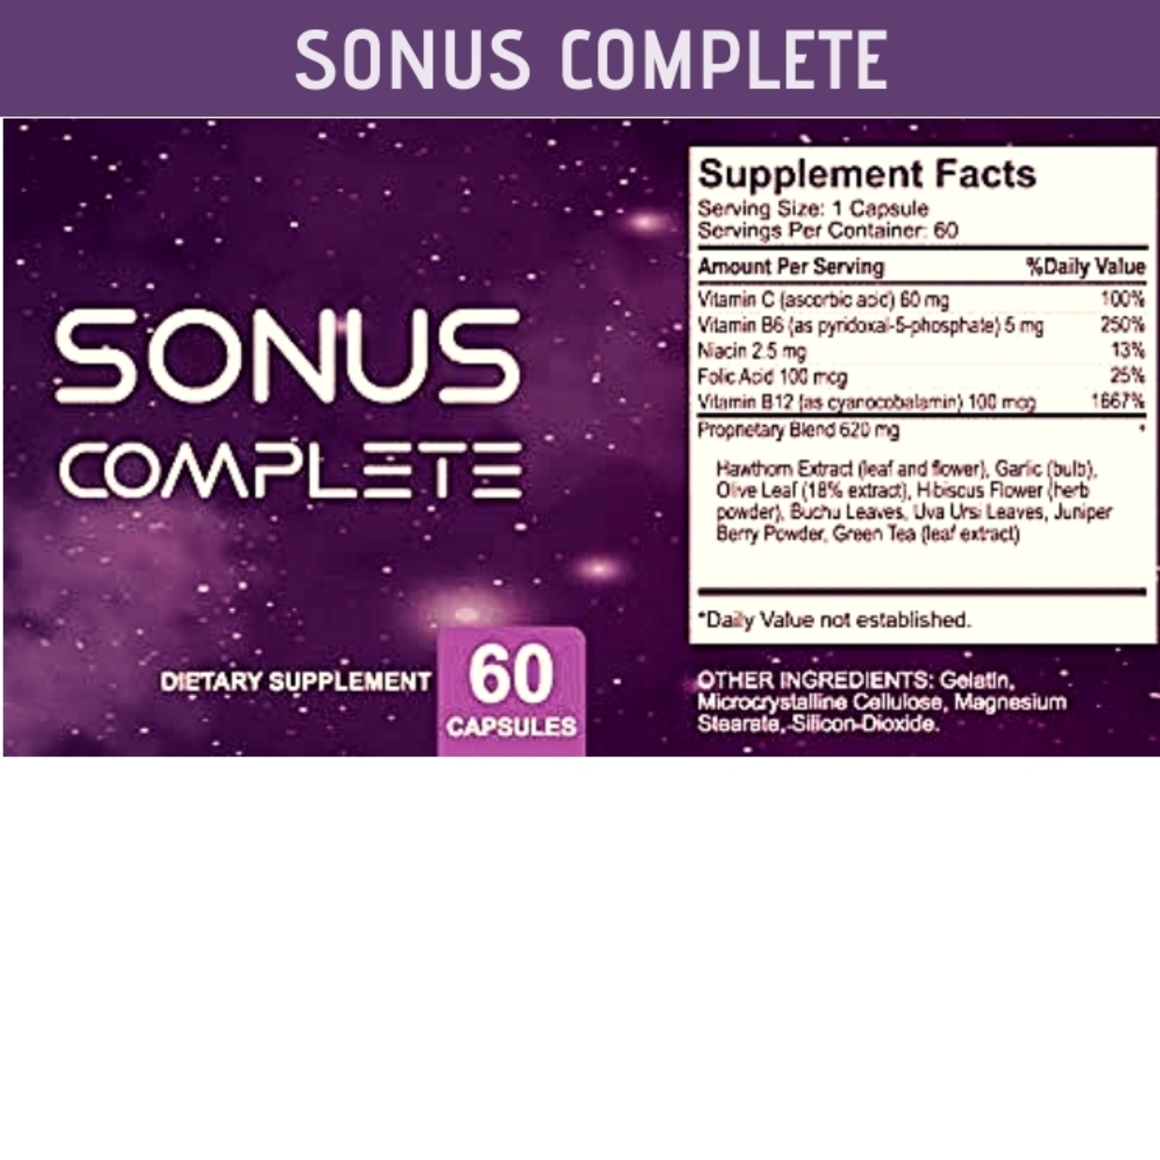 Sonus Complete - What Are The Benefits of Sonus Complete Read The Review - Online Press Release ...